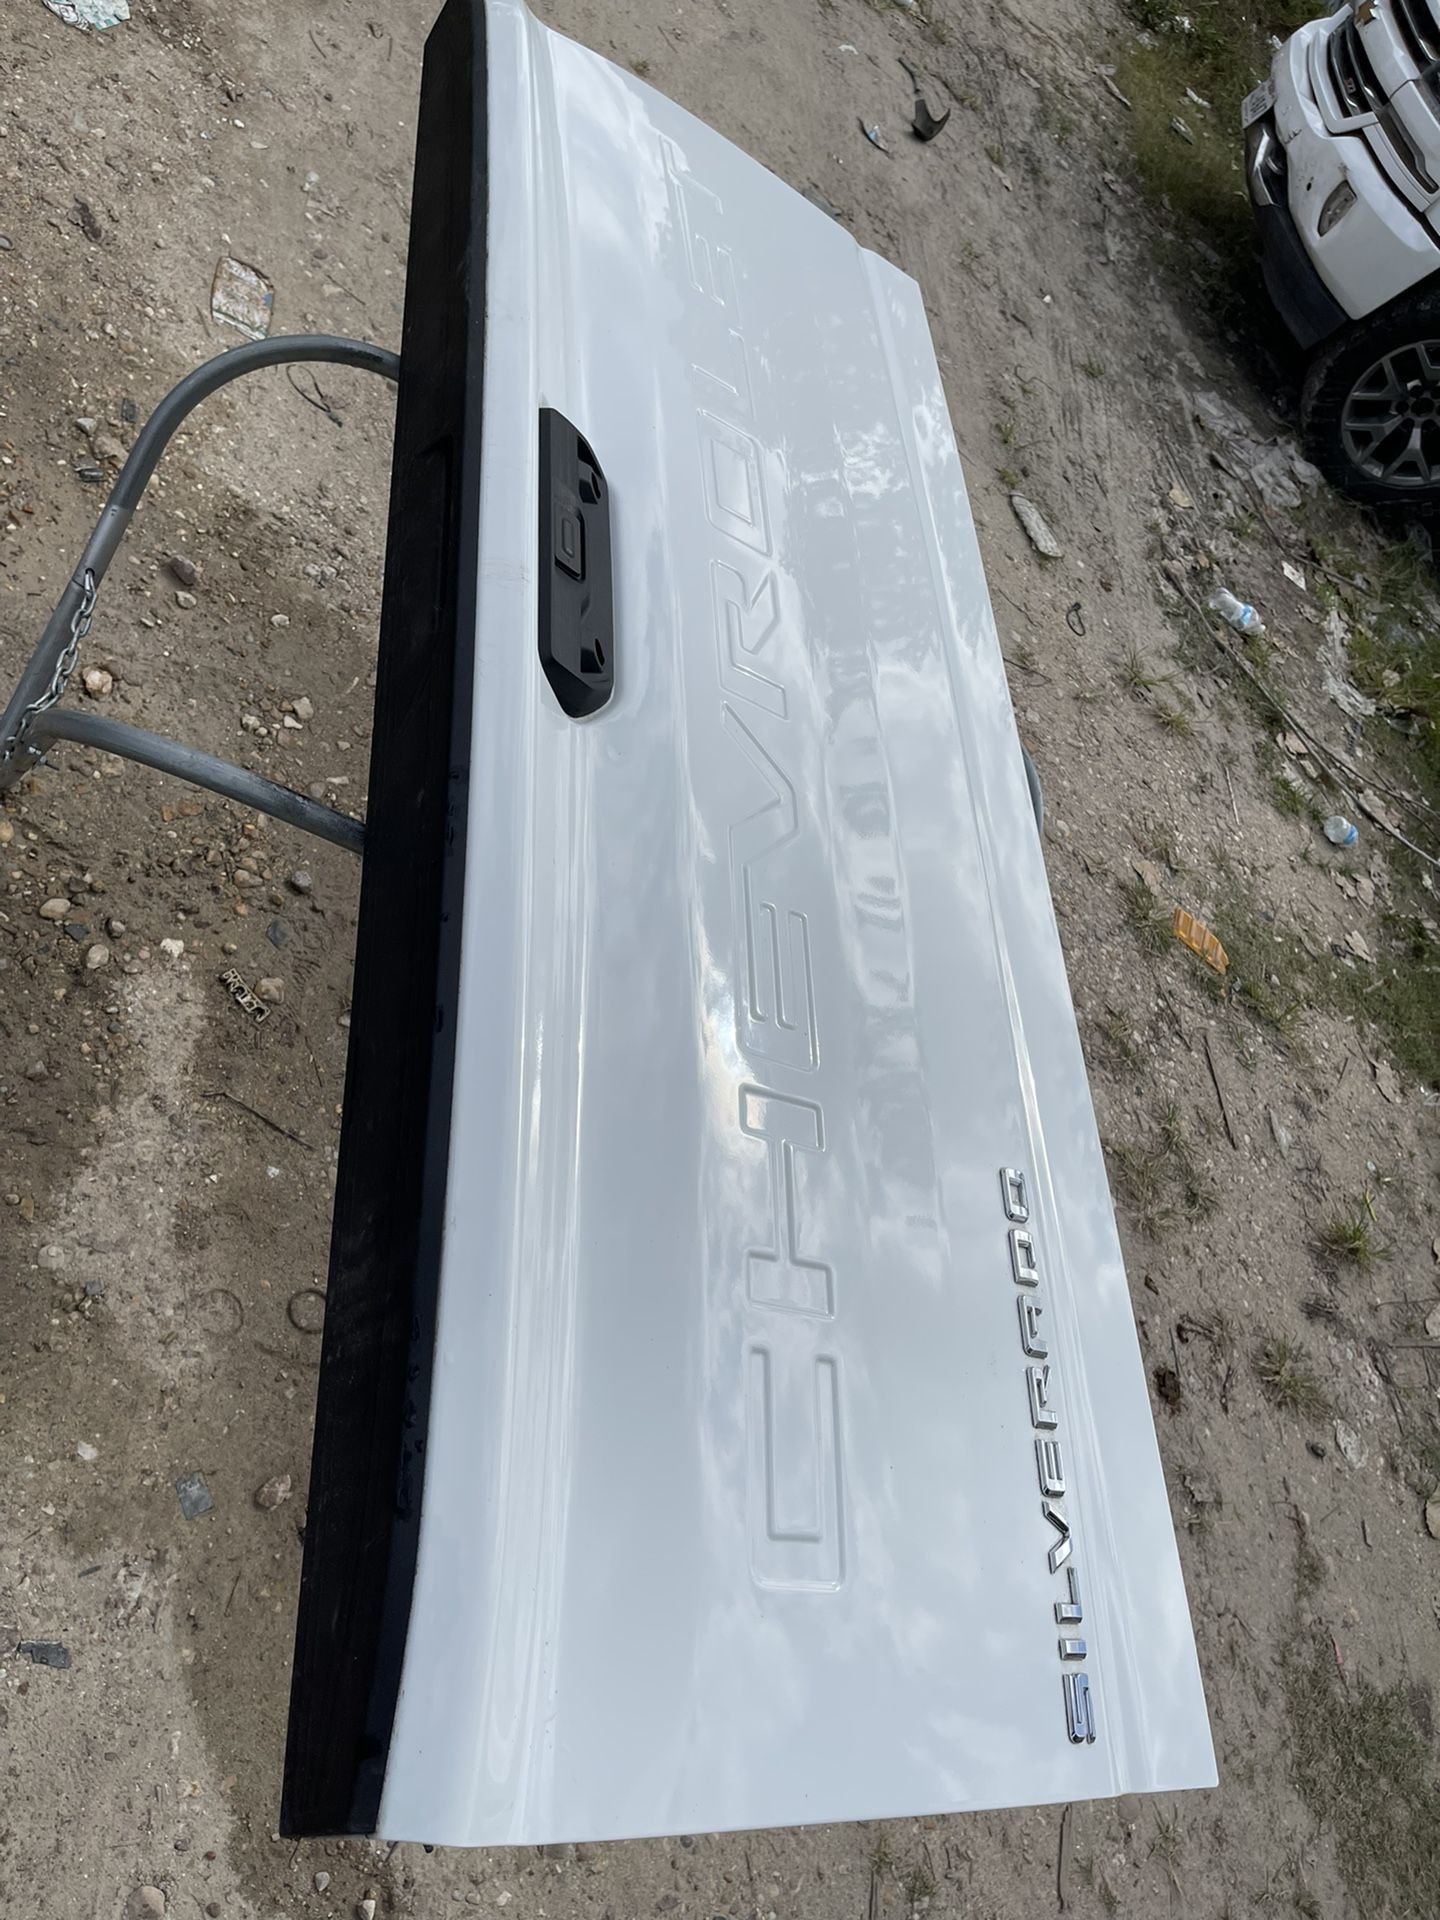 19-22 Chevrolet Silverado Tailgate, Fits 1(contact info removed)(not Dents Or Scratchhes, White Color)